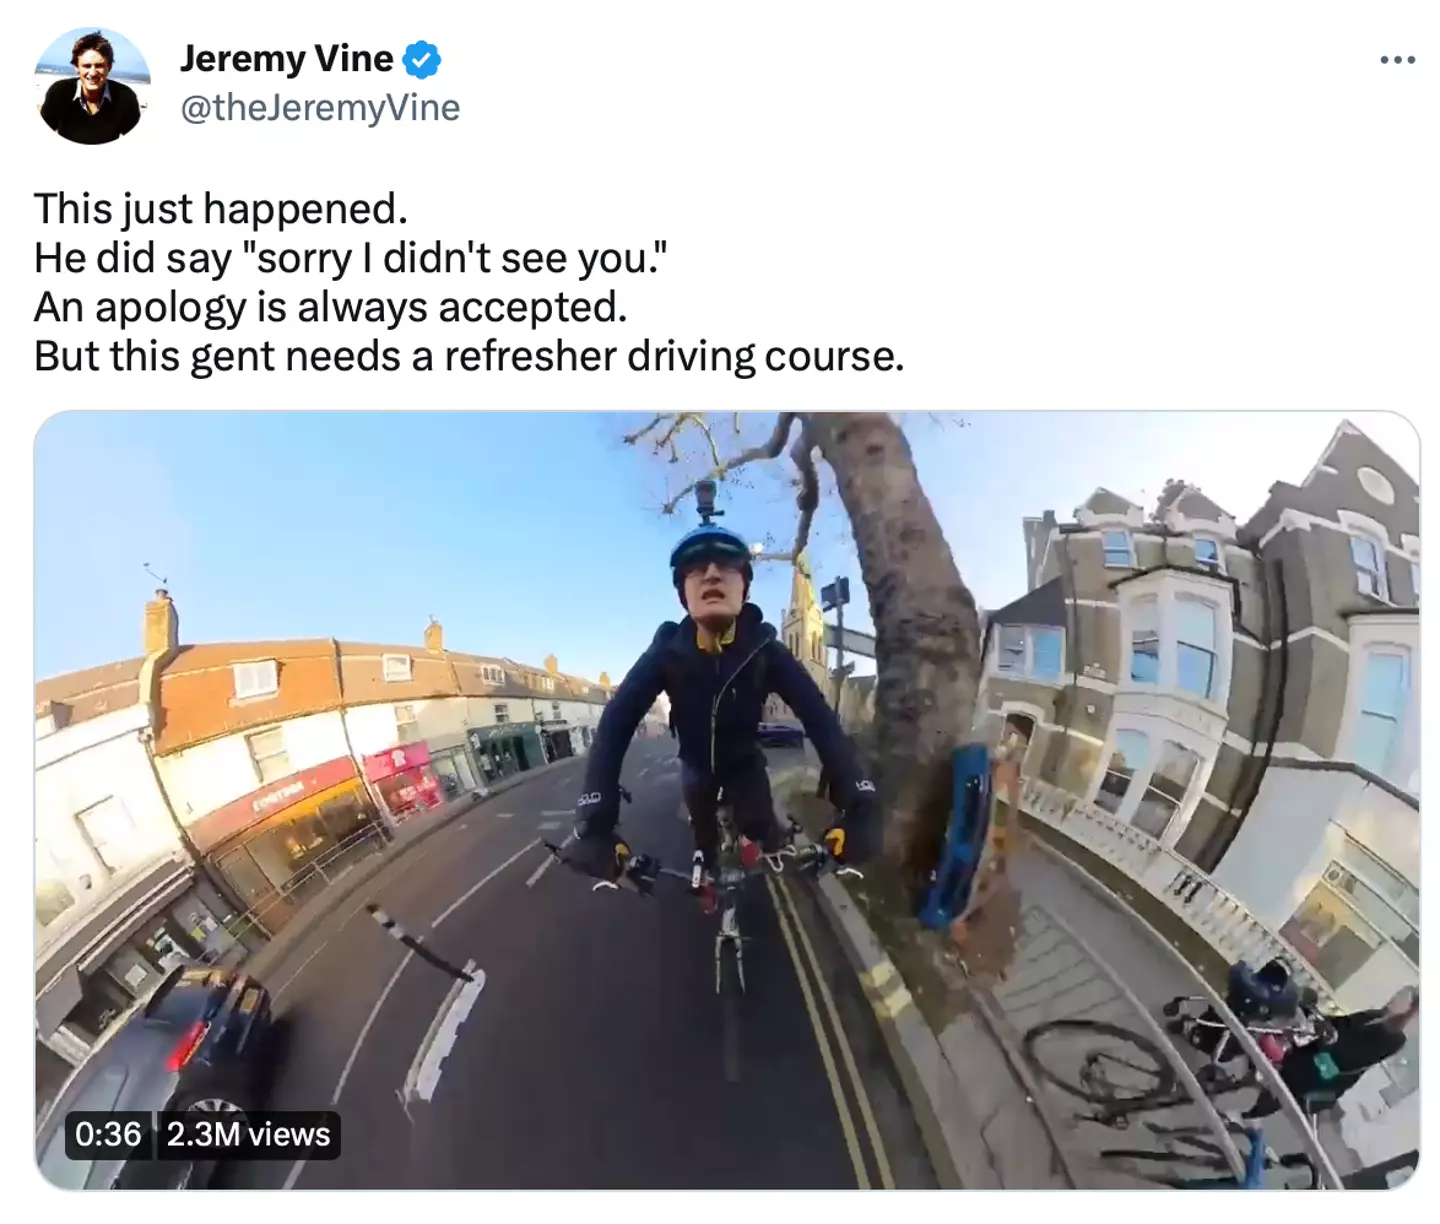 Jeremy shared the footage from the incident online.